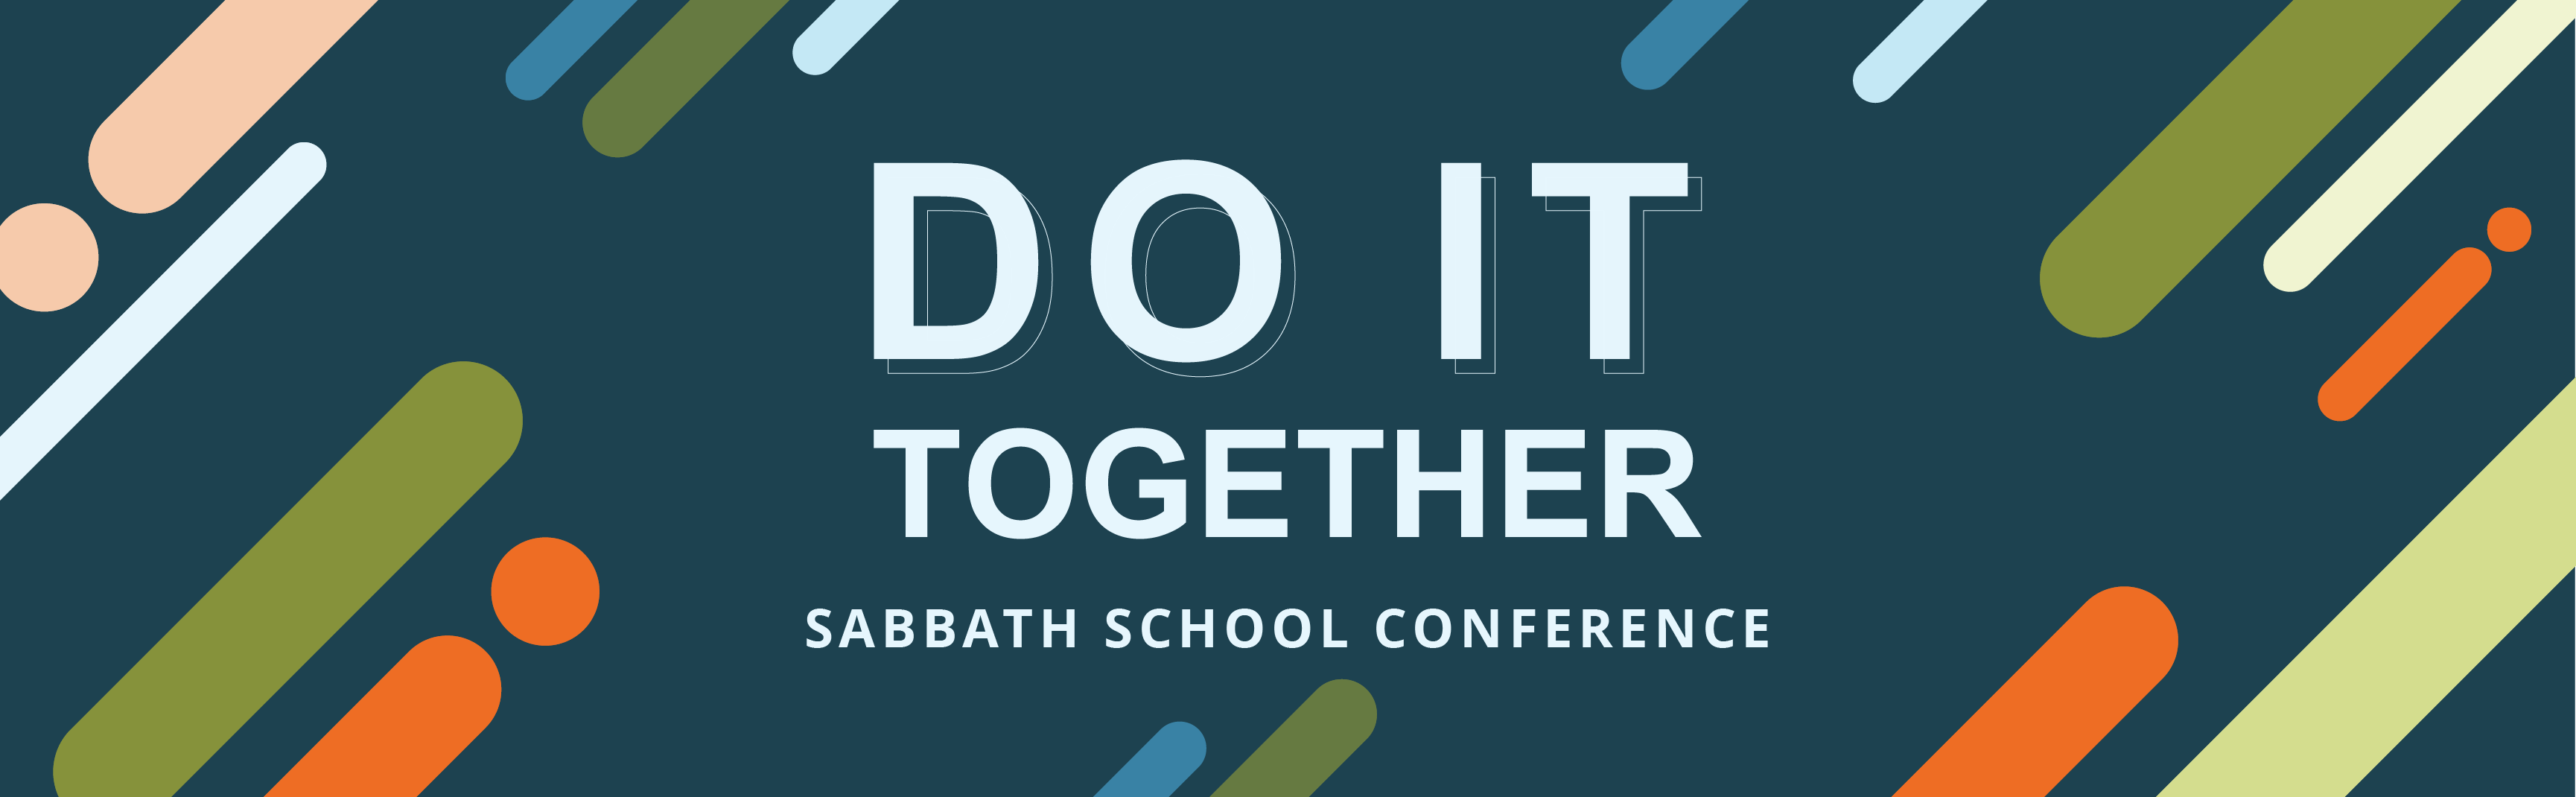 Do It Together Sabbath School Conference Event Promo Image